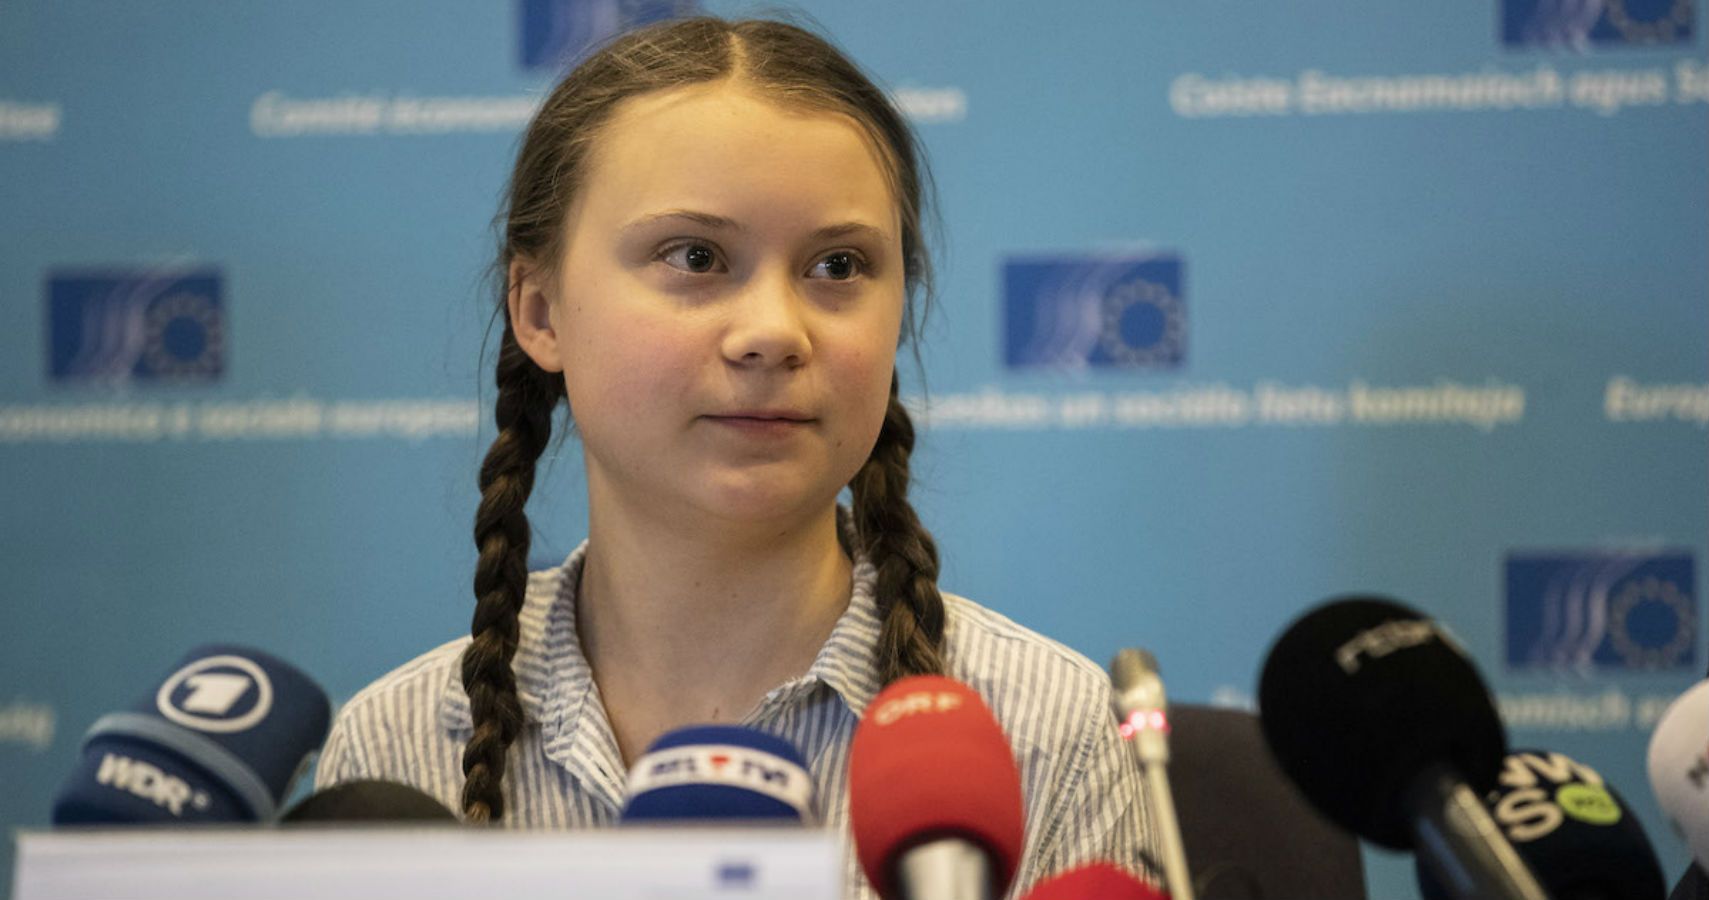 16-Year-Old Greta Thunberg Has Been Nominated For The Nobel Peace Prize1709 x 900